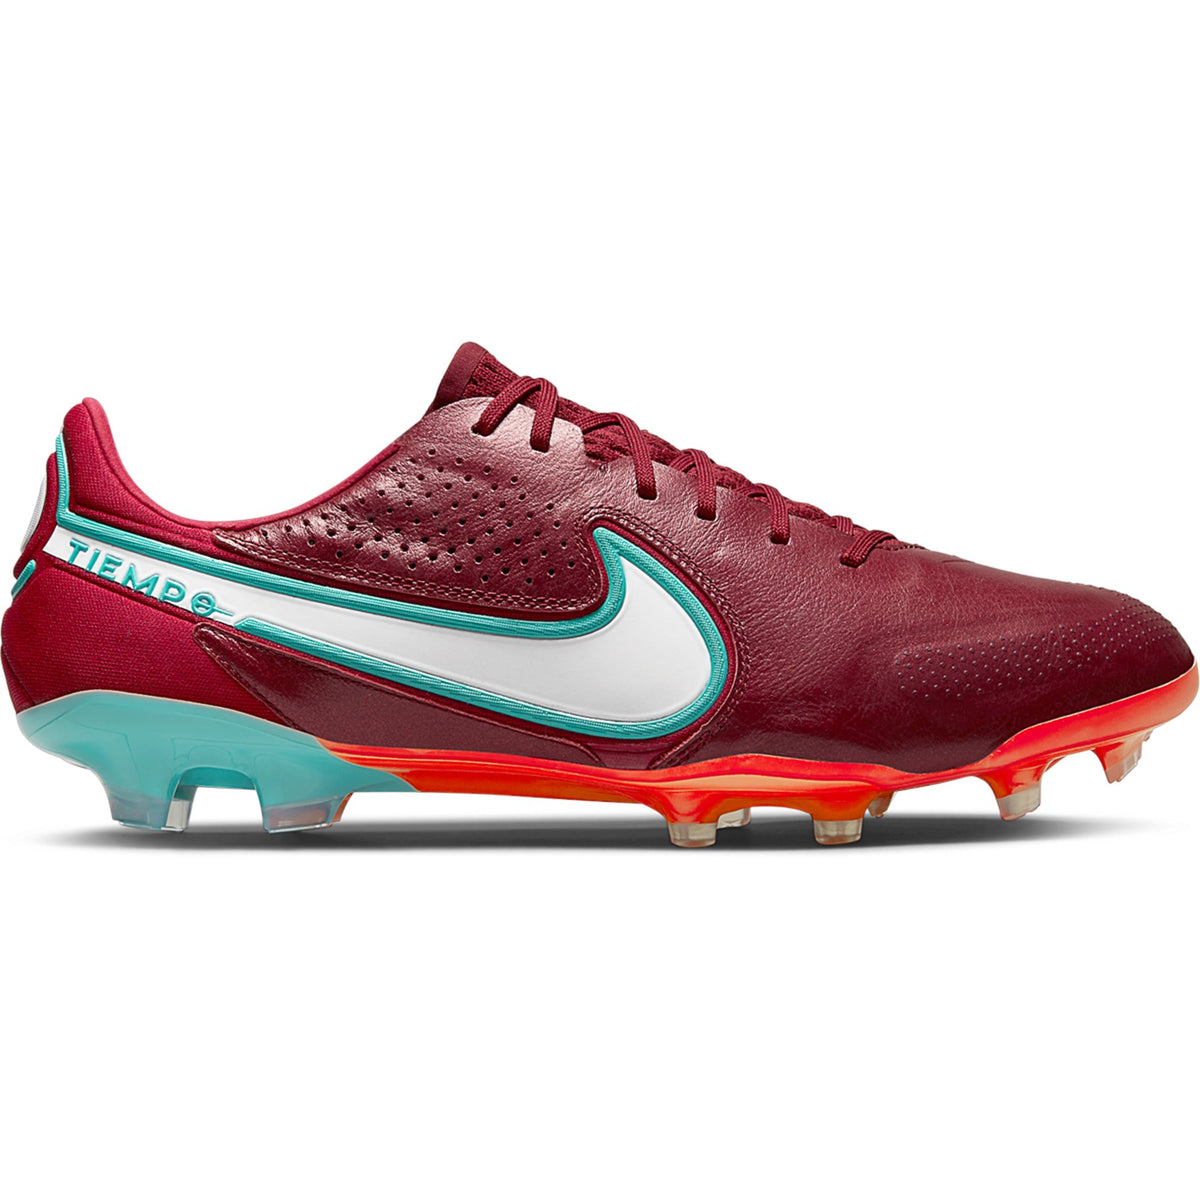 Tiempo Legend 9 FG Firm Ground Soccer Cleat Team Hibiscus/Bright Turquoise CZ8482-616 – Soccer Zone USA